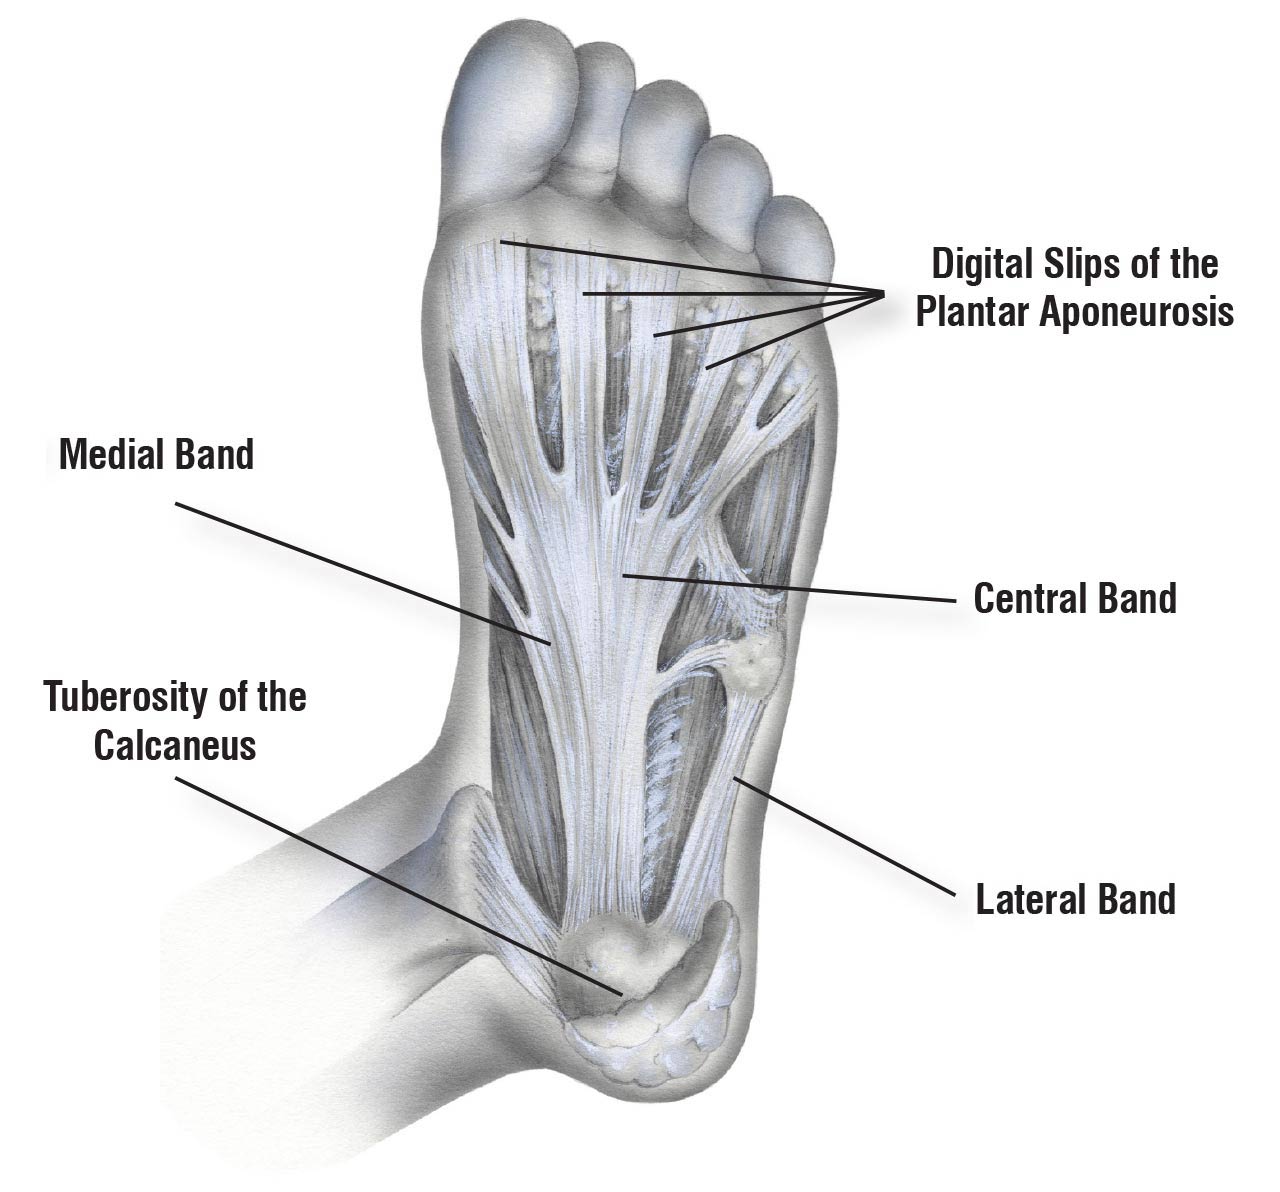 Do the Fasciae of the Soleus Have a Role in Plantar Fasciitis? Part II